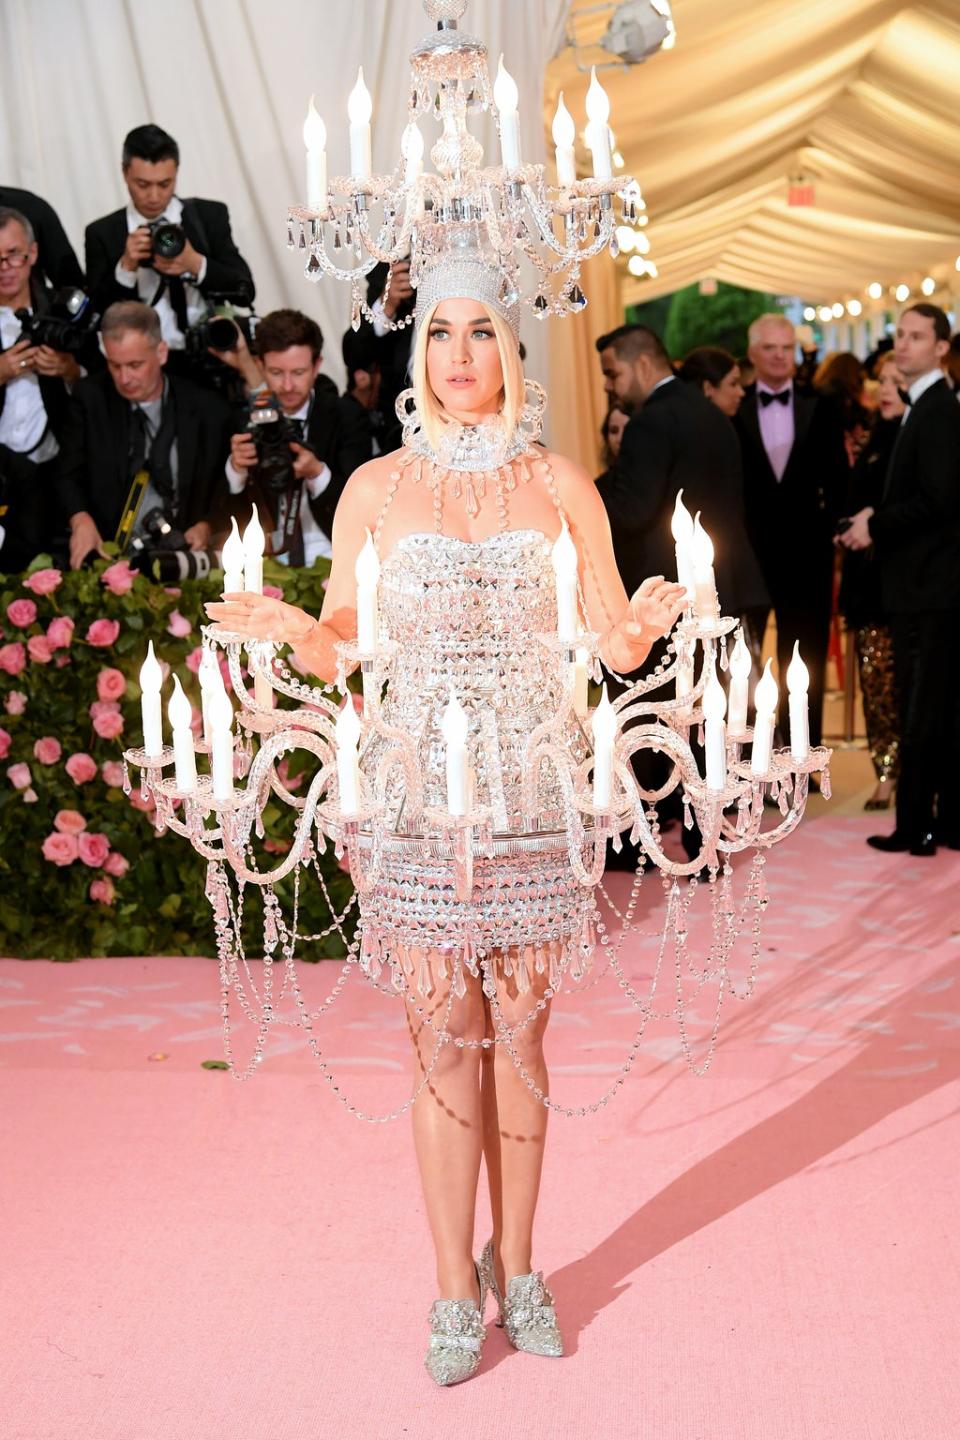 Katy Perry wears a chandelier-inspired dress to Met Gala (Getty Images)